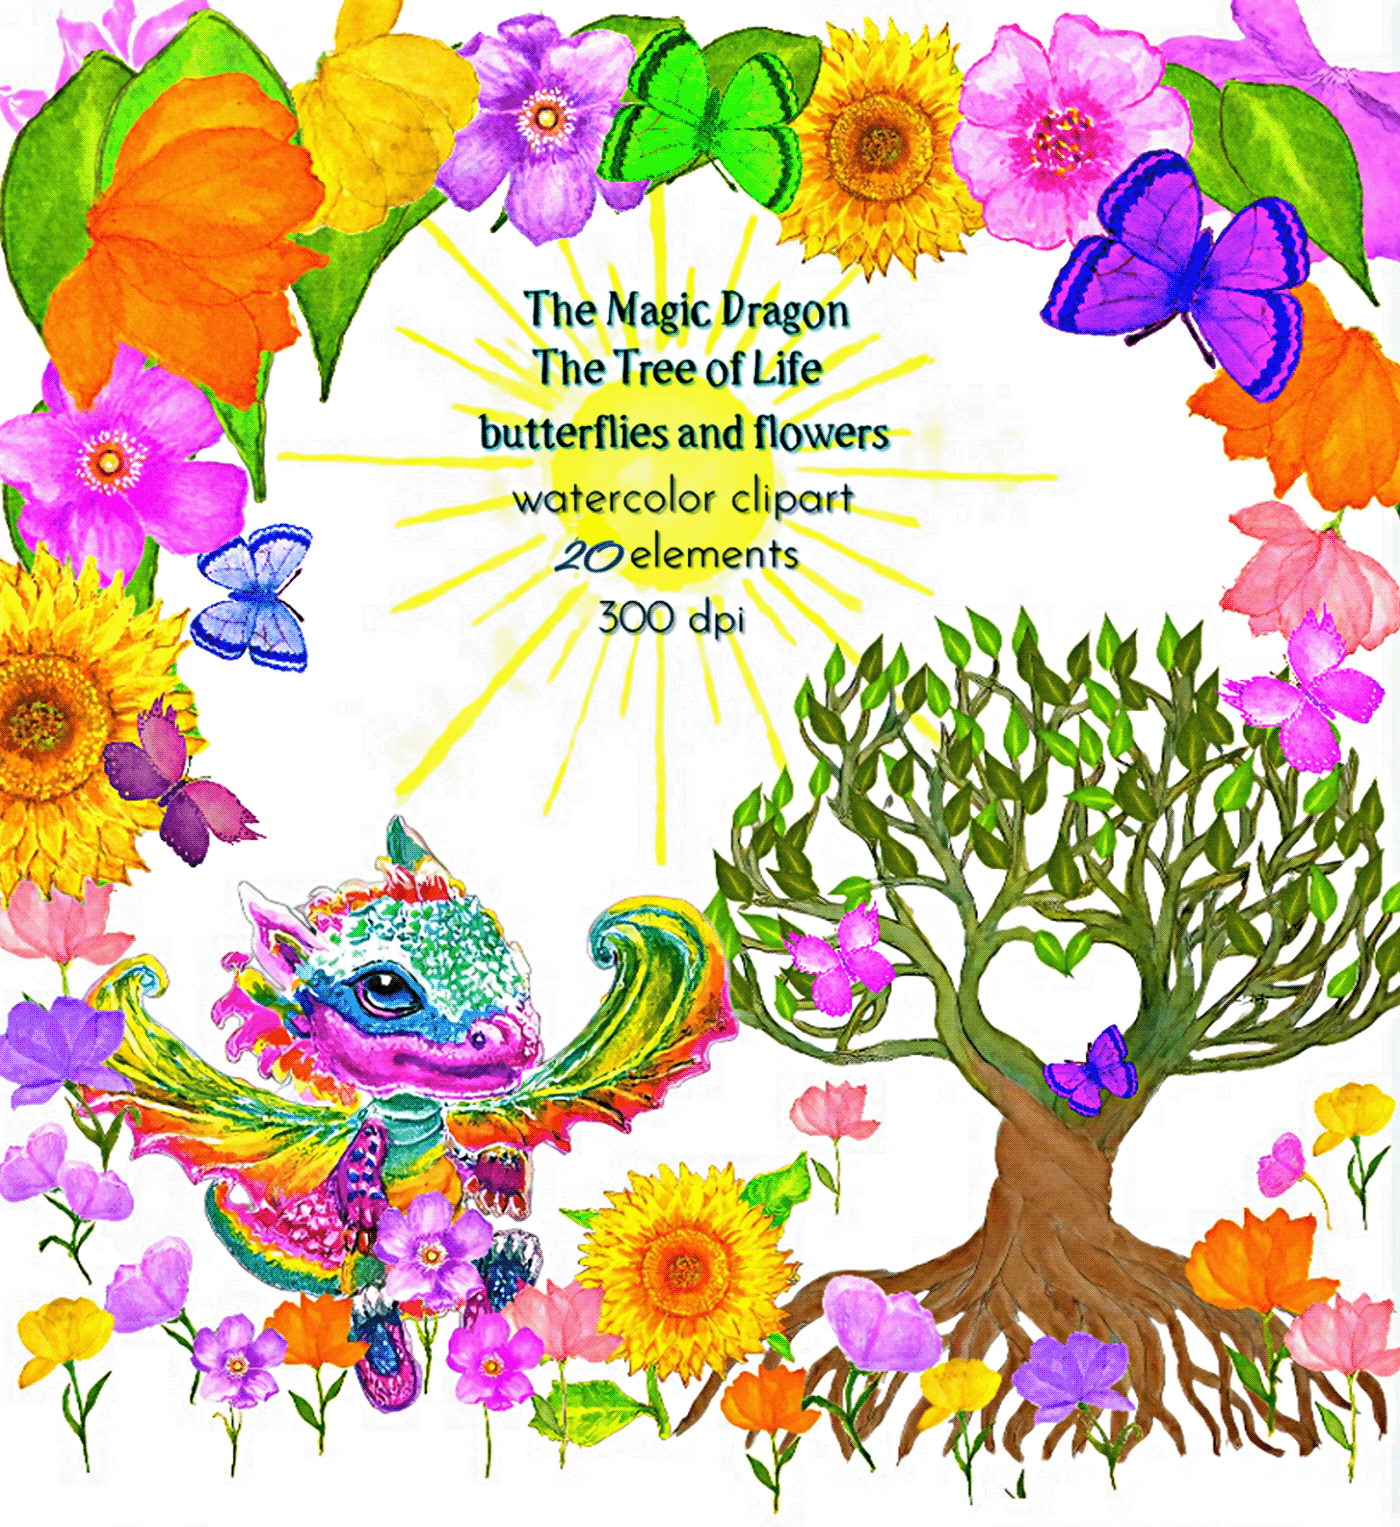 Watercolor clipart with a dragon in a magical garden